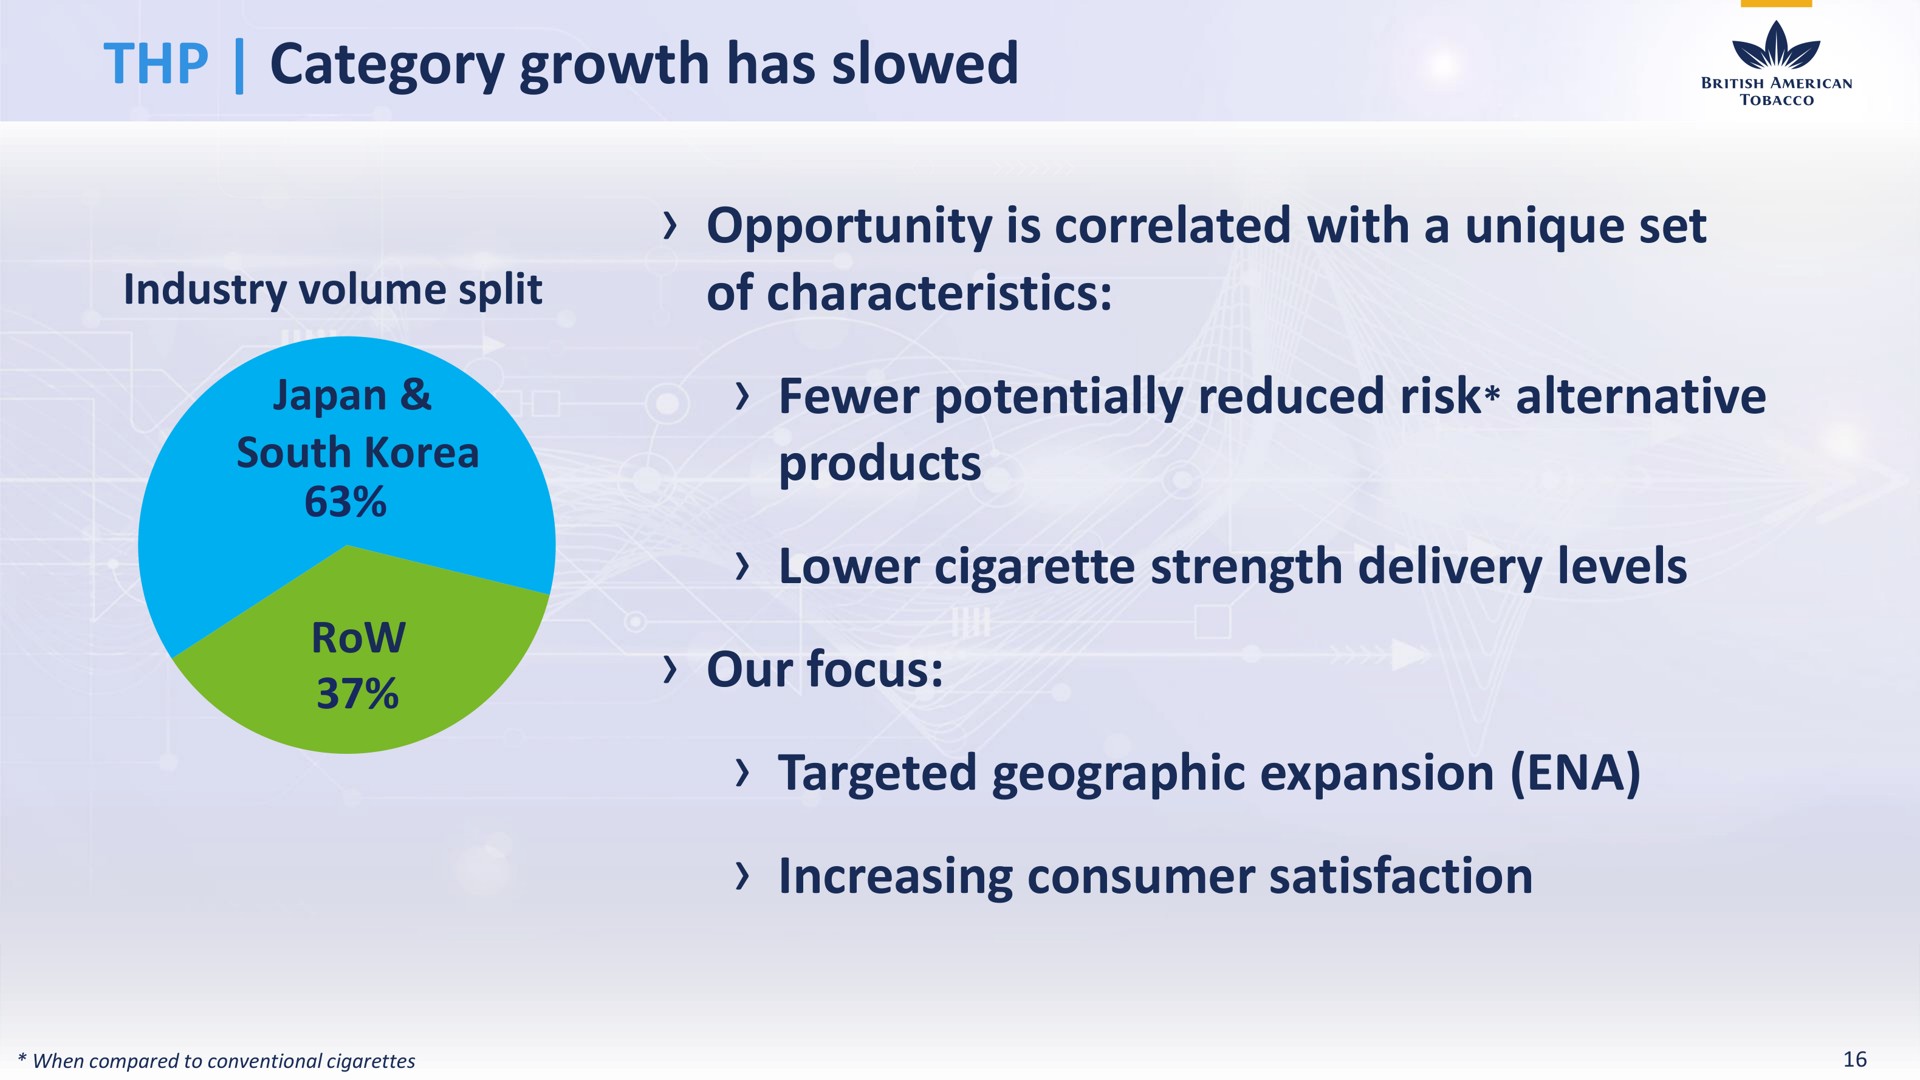 category growth has slowed an opportunity is correlated with a unique set potentially reduced risk alternative products lower cigarette strength delivery levels targeted geographic expansion increasing consumer satisfaction | BAT